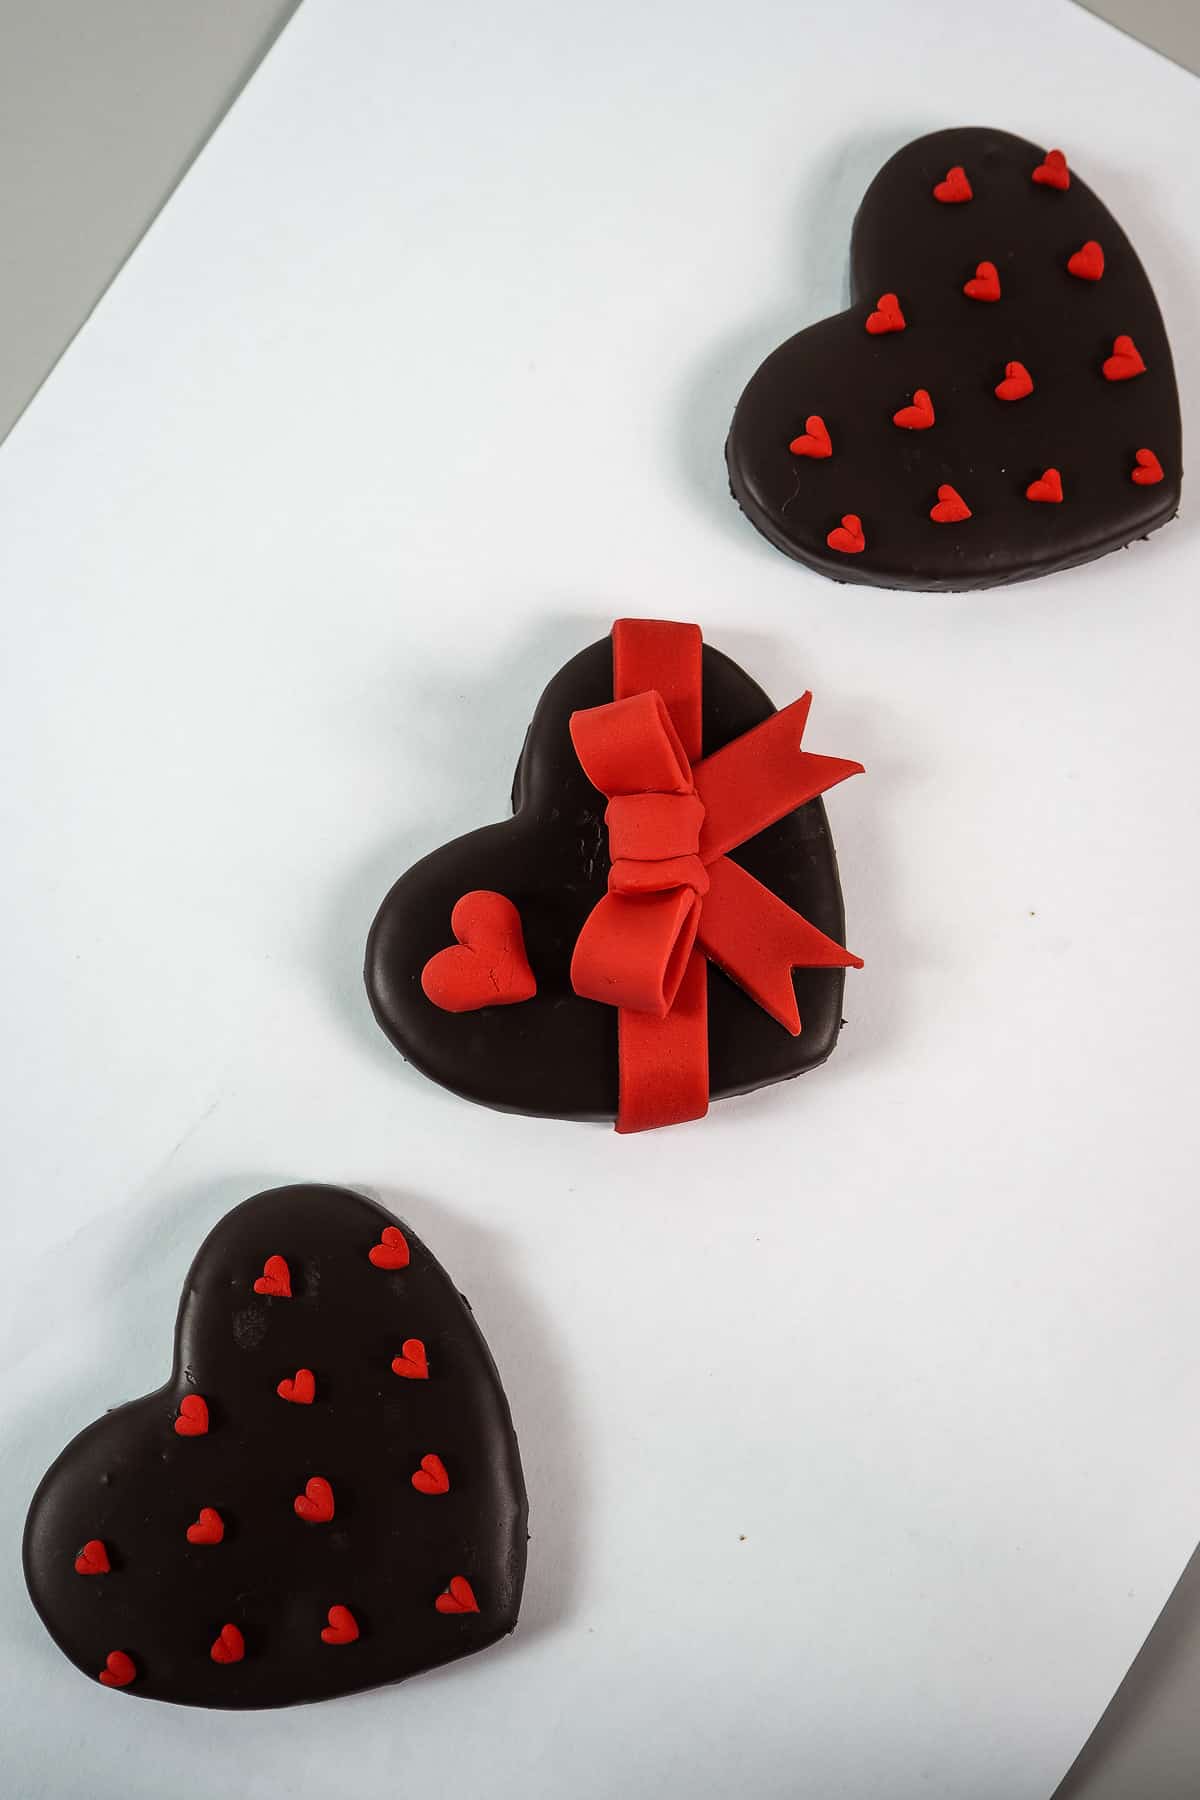 A set of 3 heart shaped cookies decorated with red hearts and bow